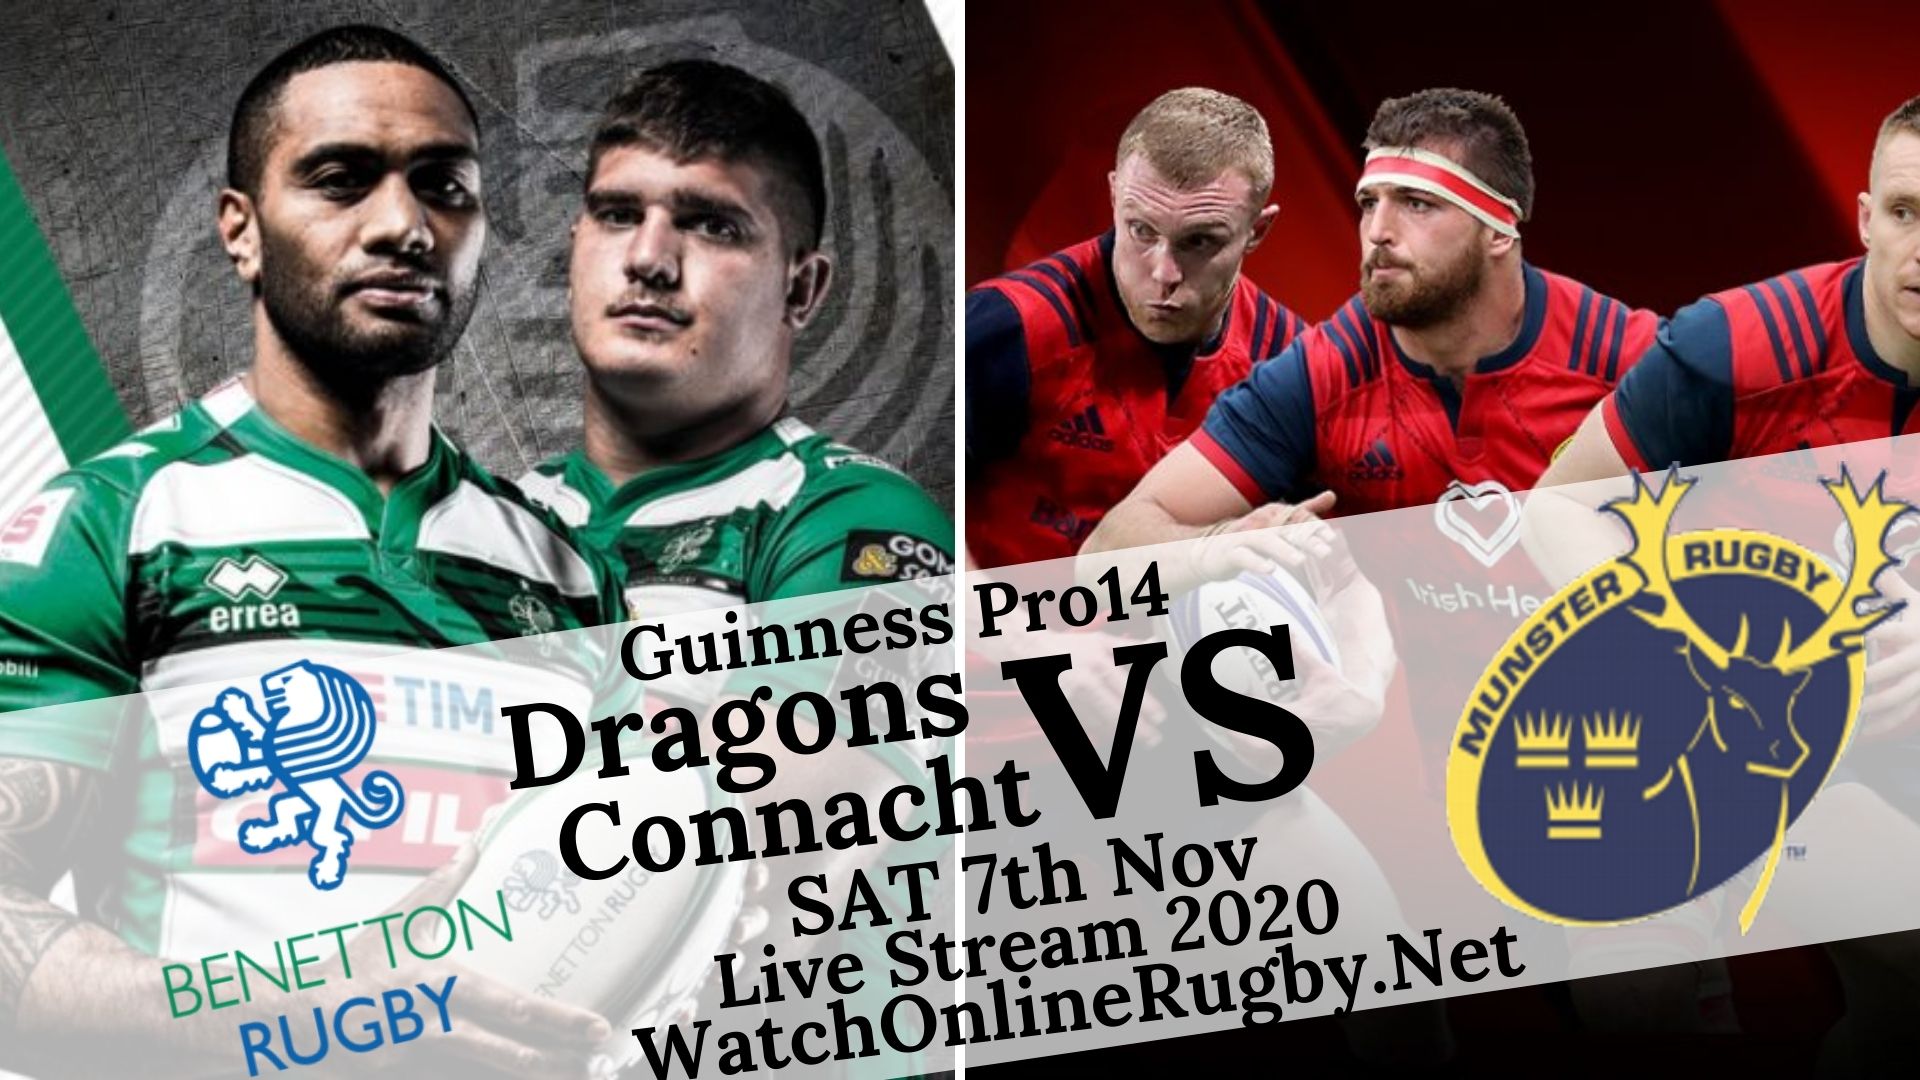 connacht-vs-dragons-rugby-live